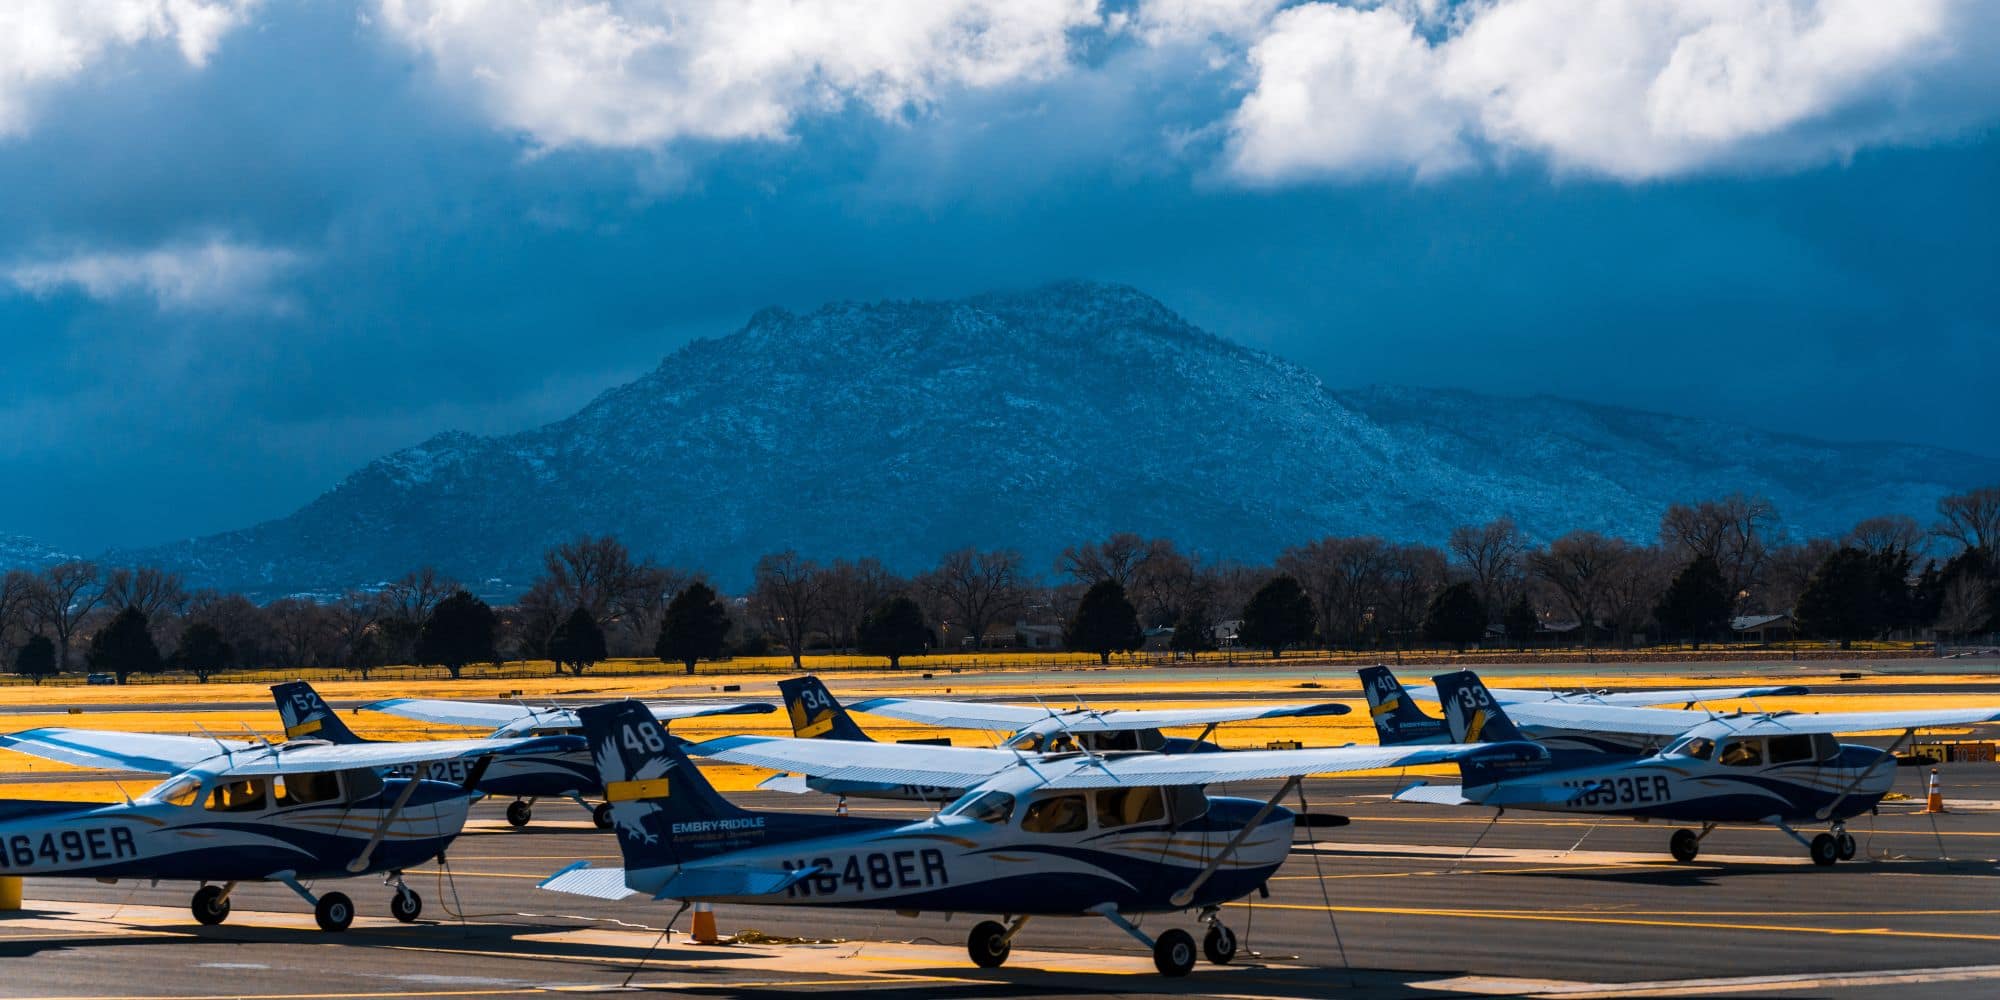 The Prescott Campus Flight Line with Granite Mountain in the background